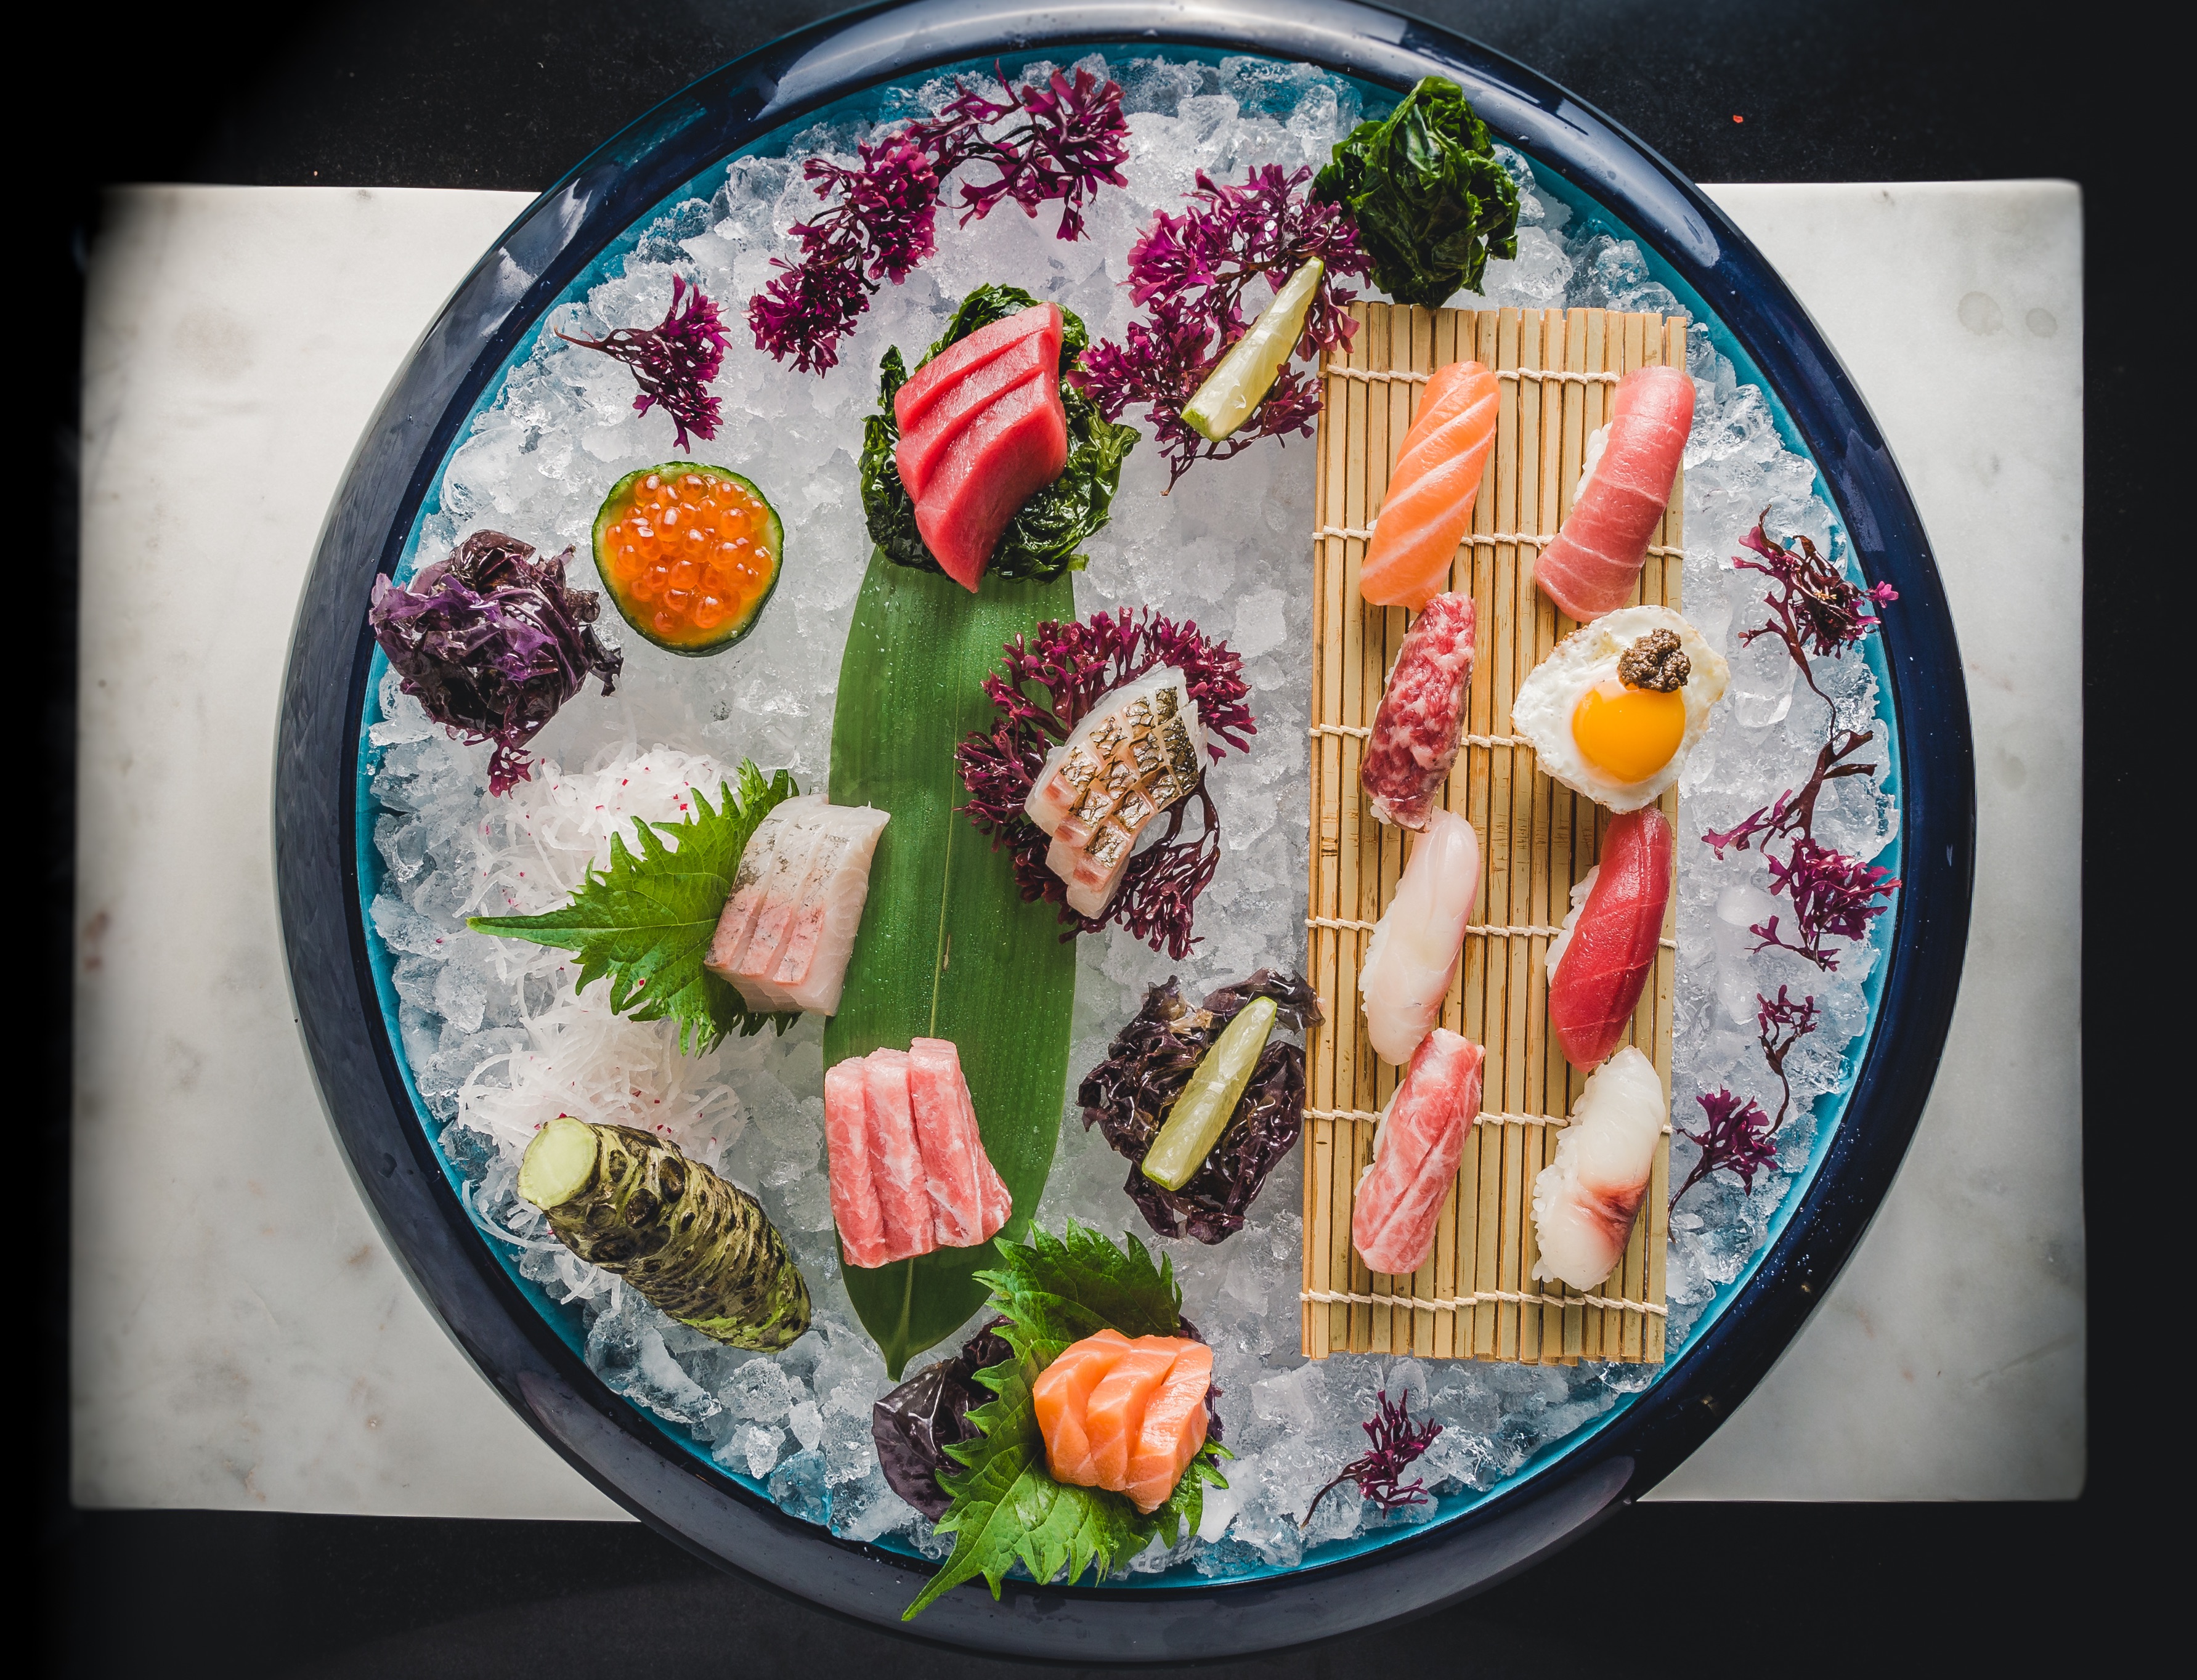 All you can eat sushi brunch is taking over London restaurants